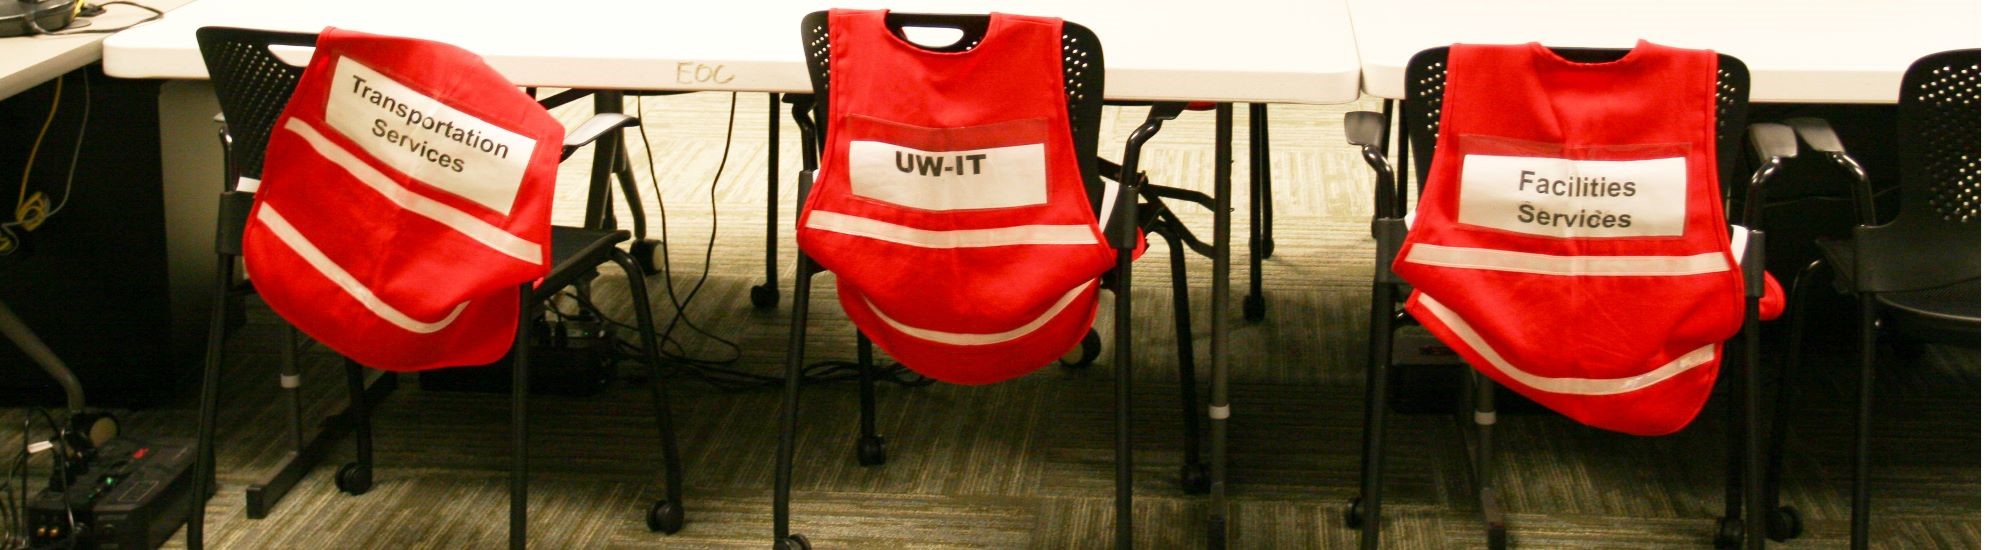 Reflective vests for department representatives draped on chairs